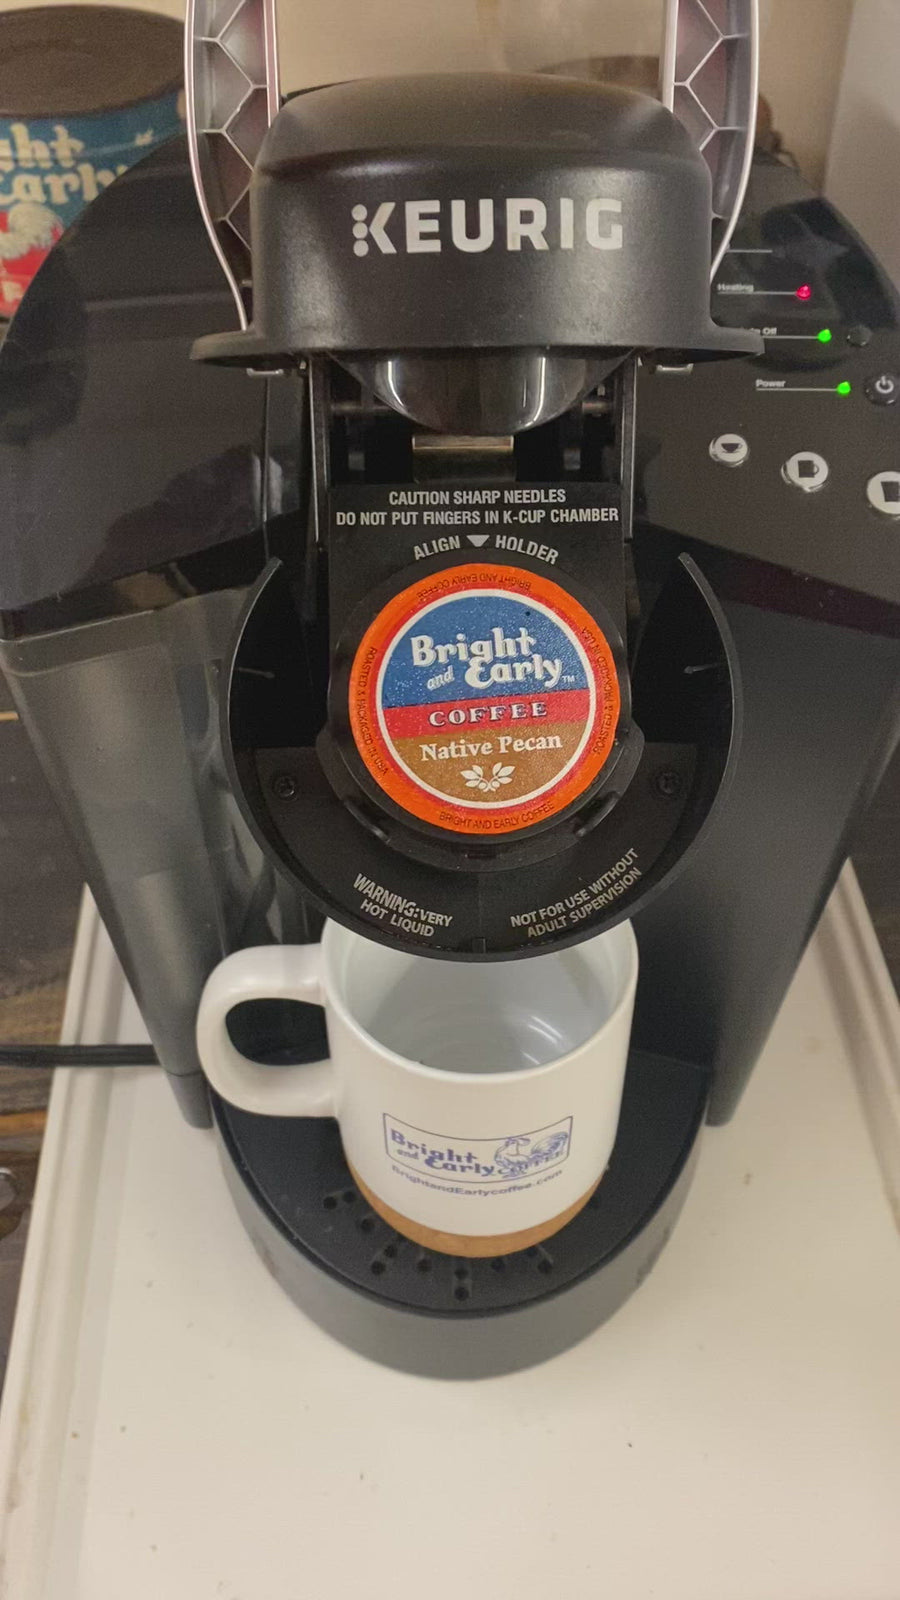 Native Pecan flavored Keurig K cup made by Bright and Early coffee using 100% arabica specialty coffee roasted and packaged in the USA 